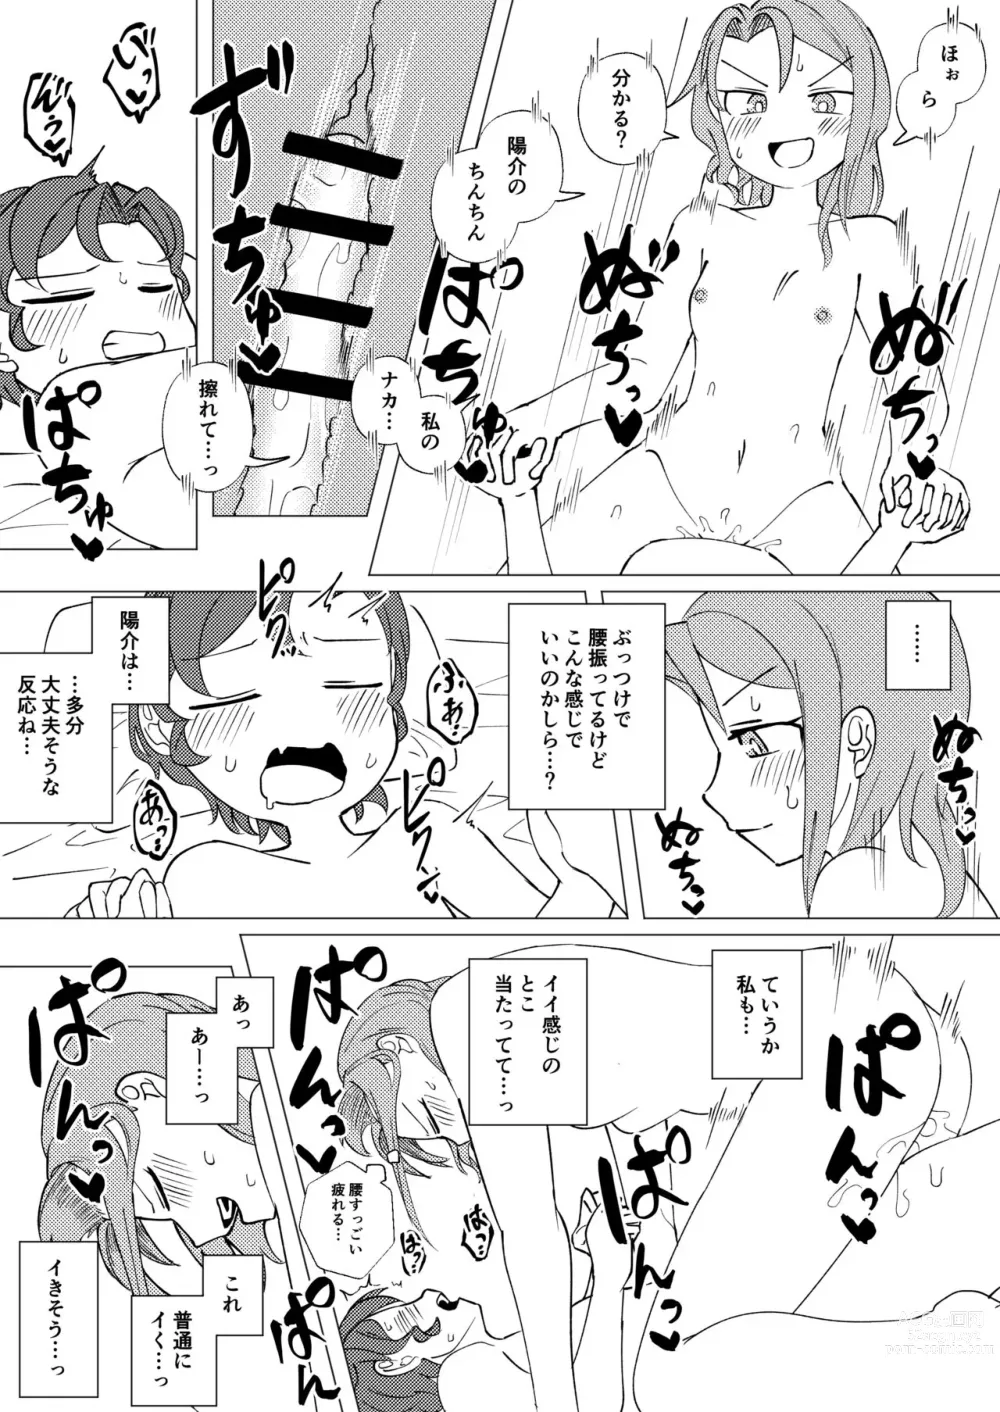 Page 3 of doujinshi Show Me! ~if Route~